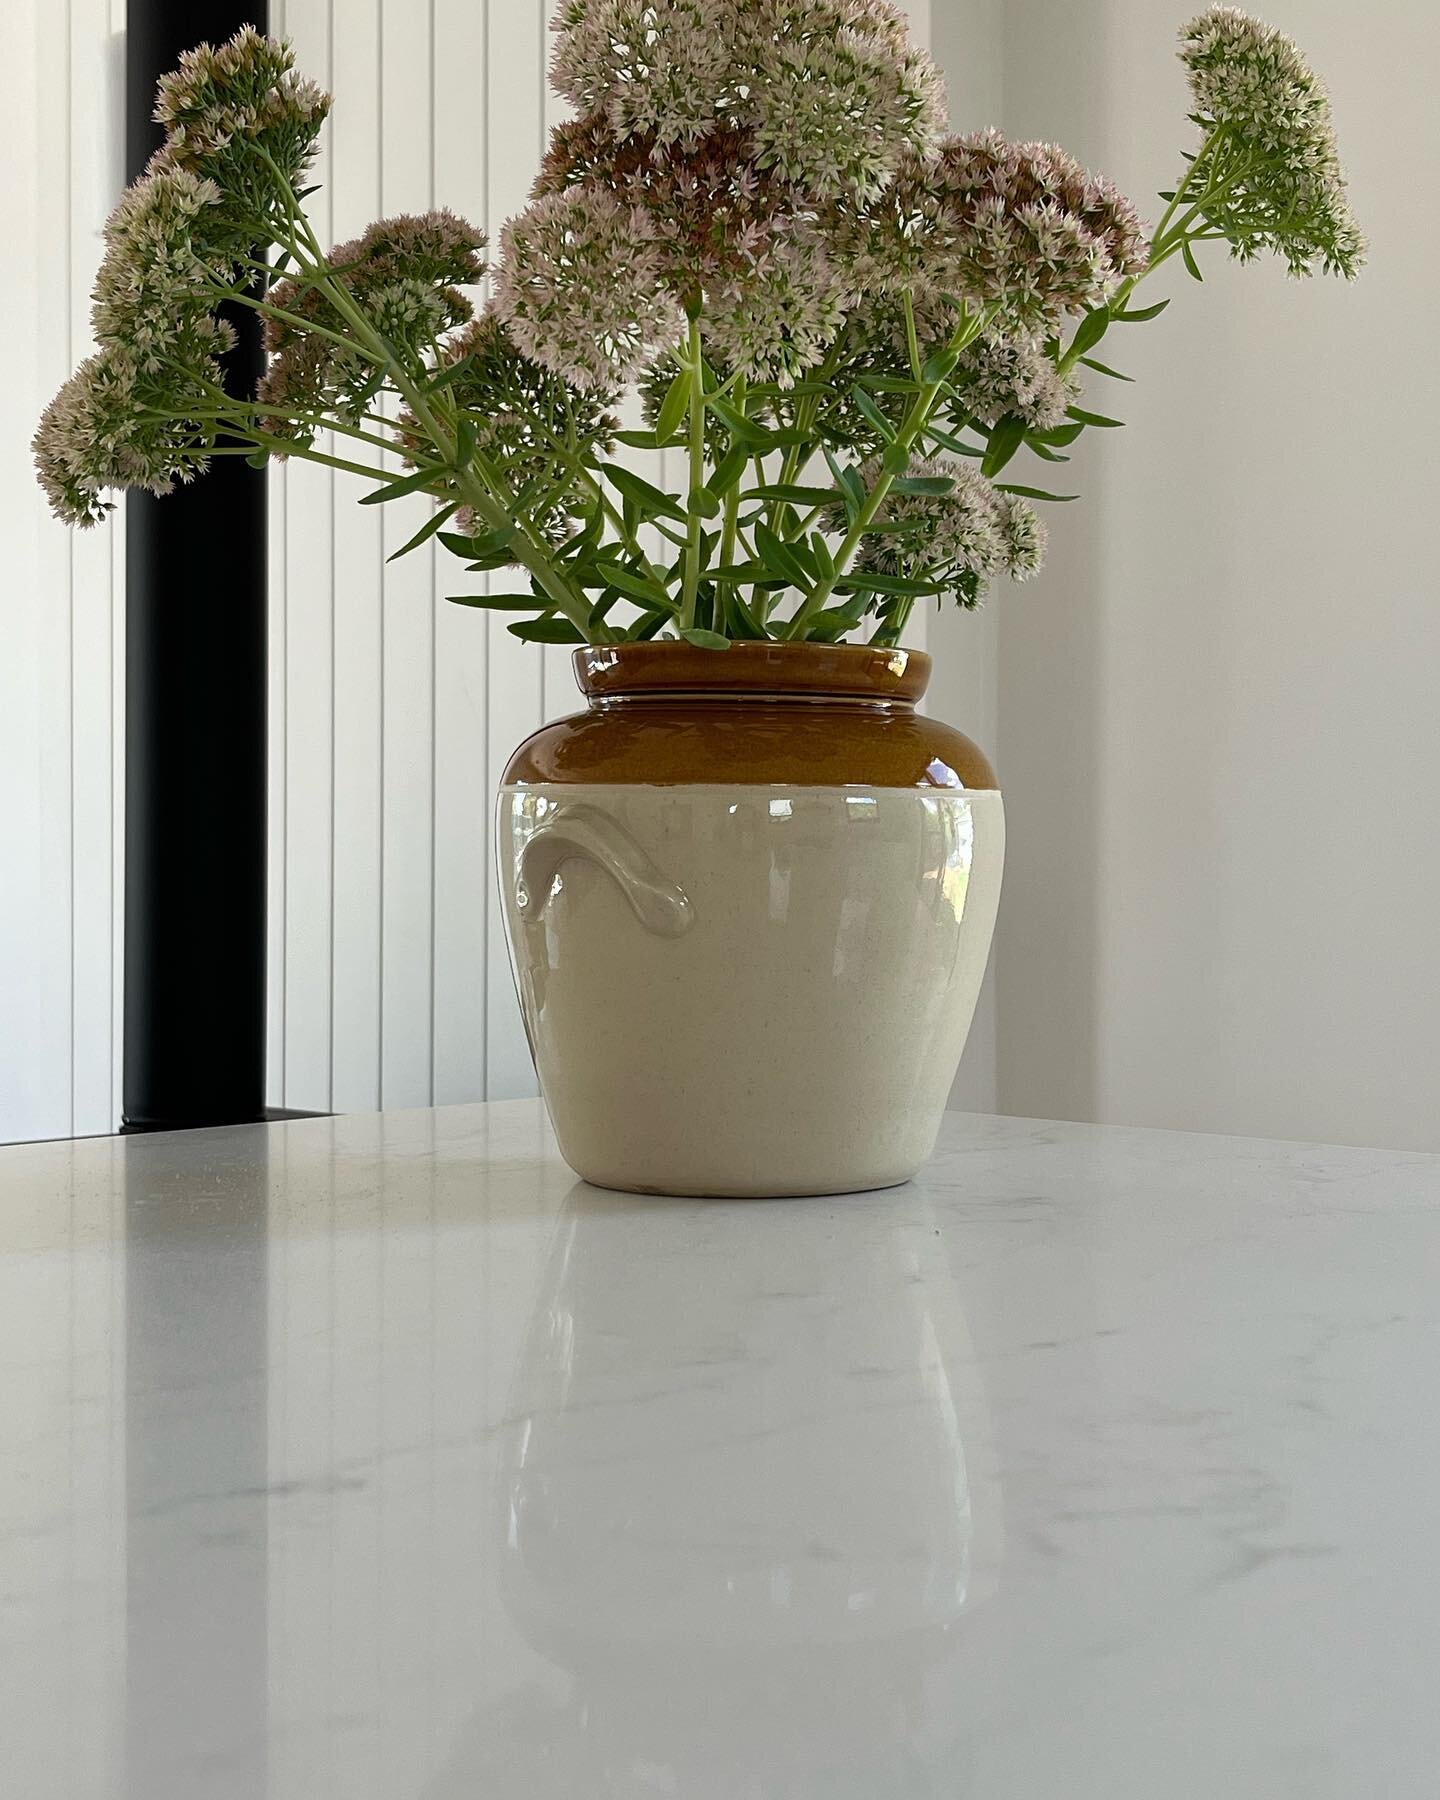 Sedum from the garden on my kitchen island today.
I purposely hung my island pendant lights higher than normal so I could have differing heights of vases and pots full of flowers or foliage.
When considering an island for your home consider how you w